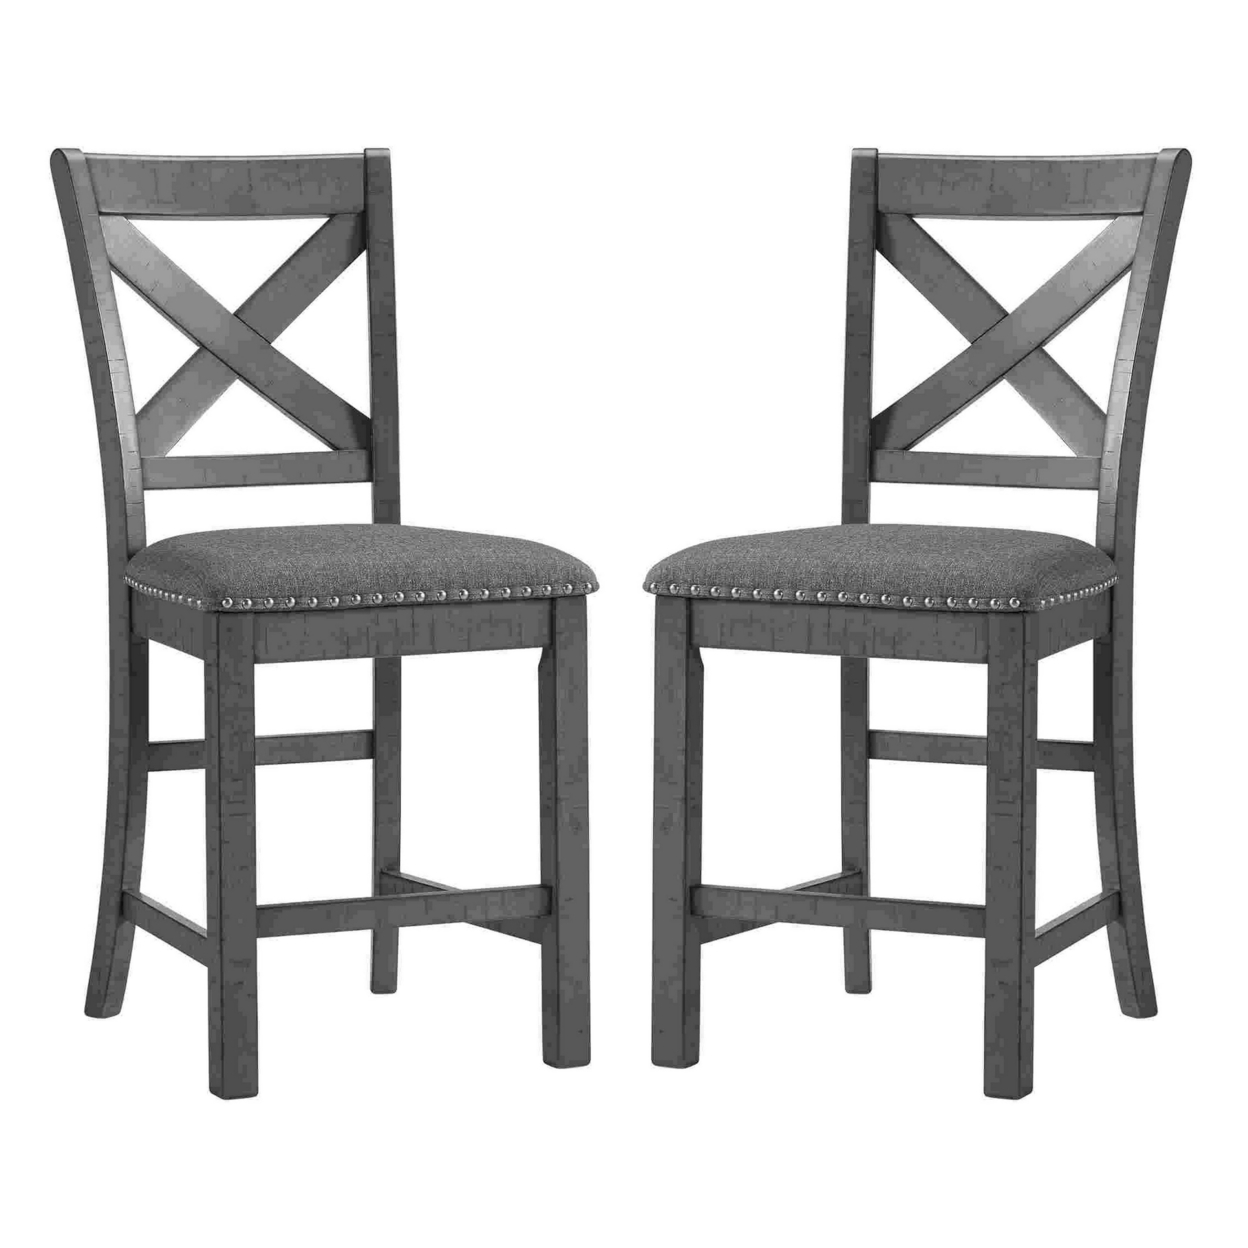 Barstool With Wooden X Shaped Back And Fabric Seat, Set Of 2, Gray- Saltoro Sherpi